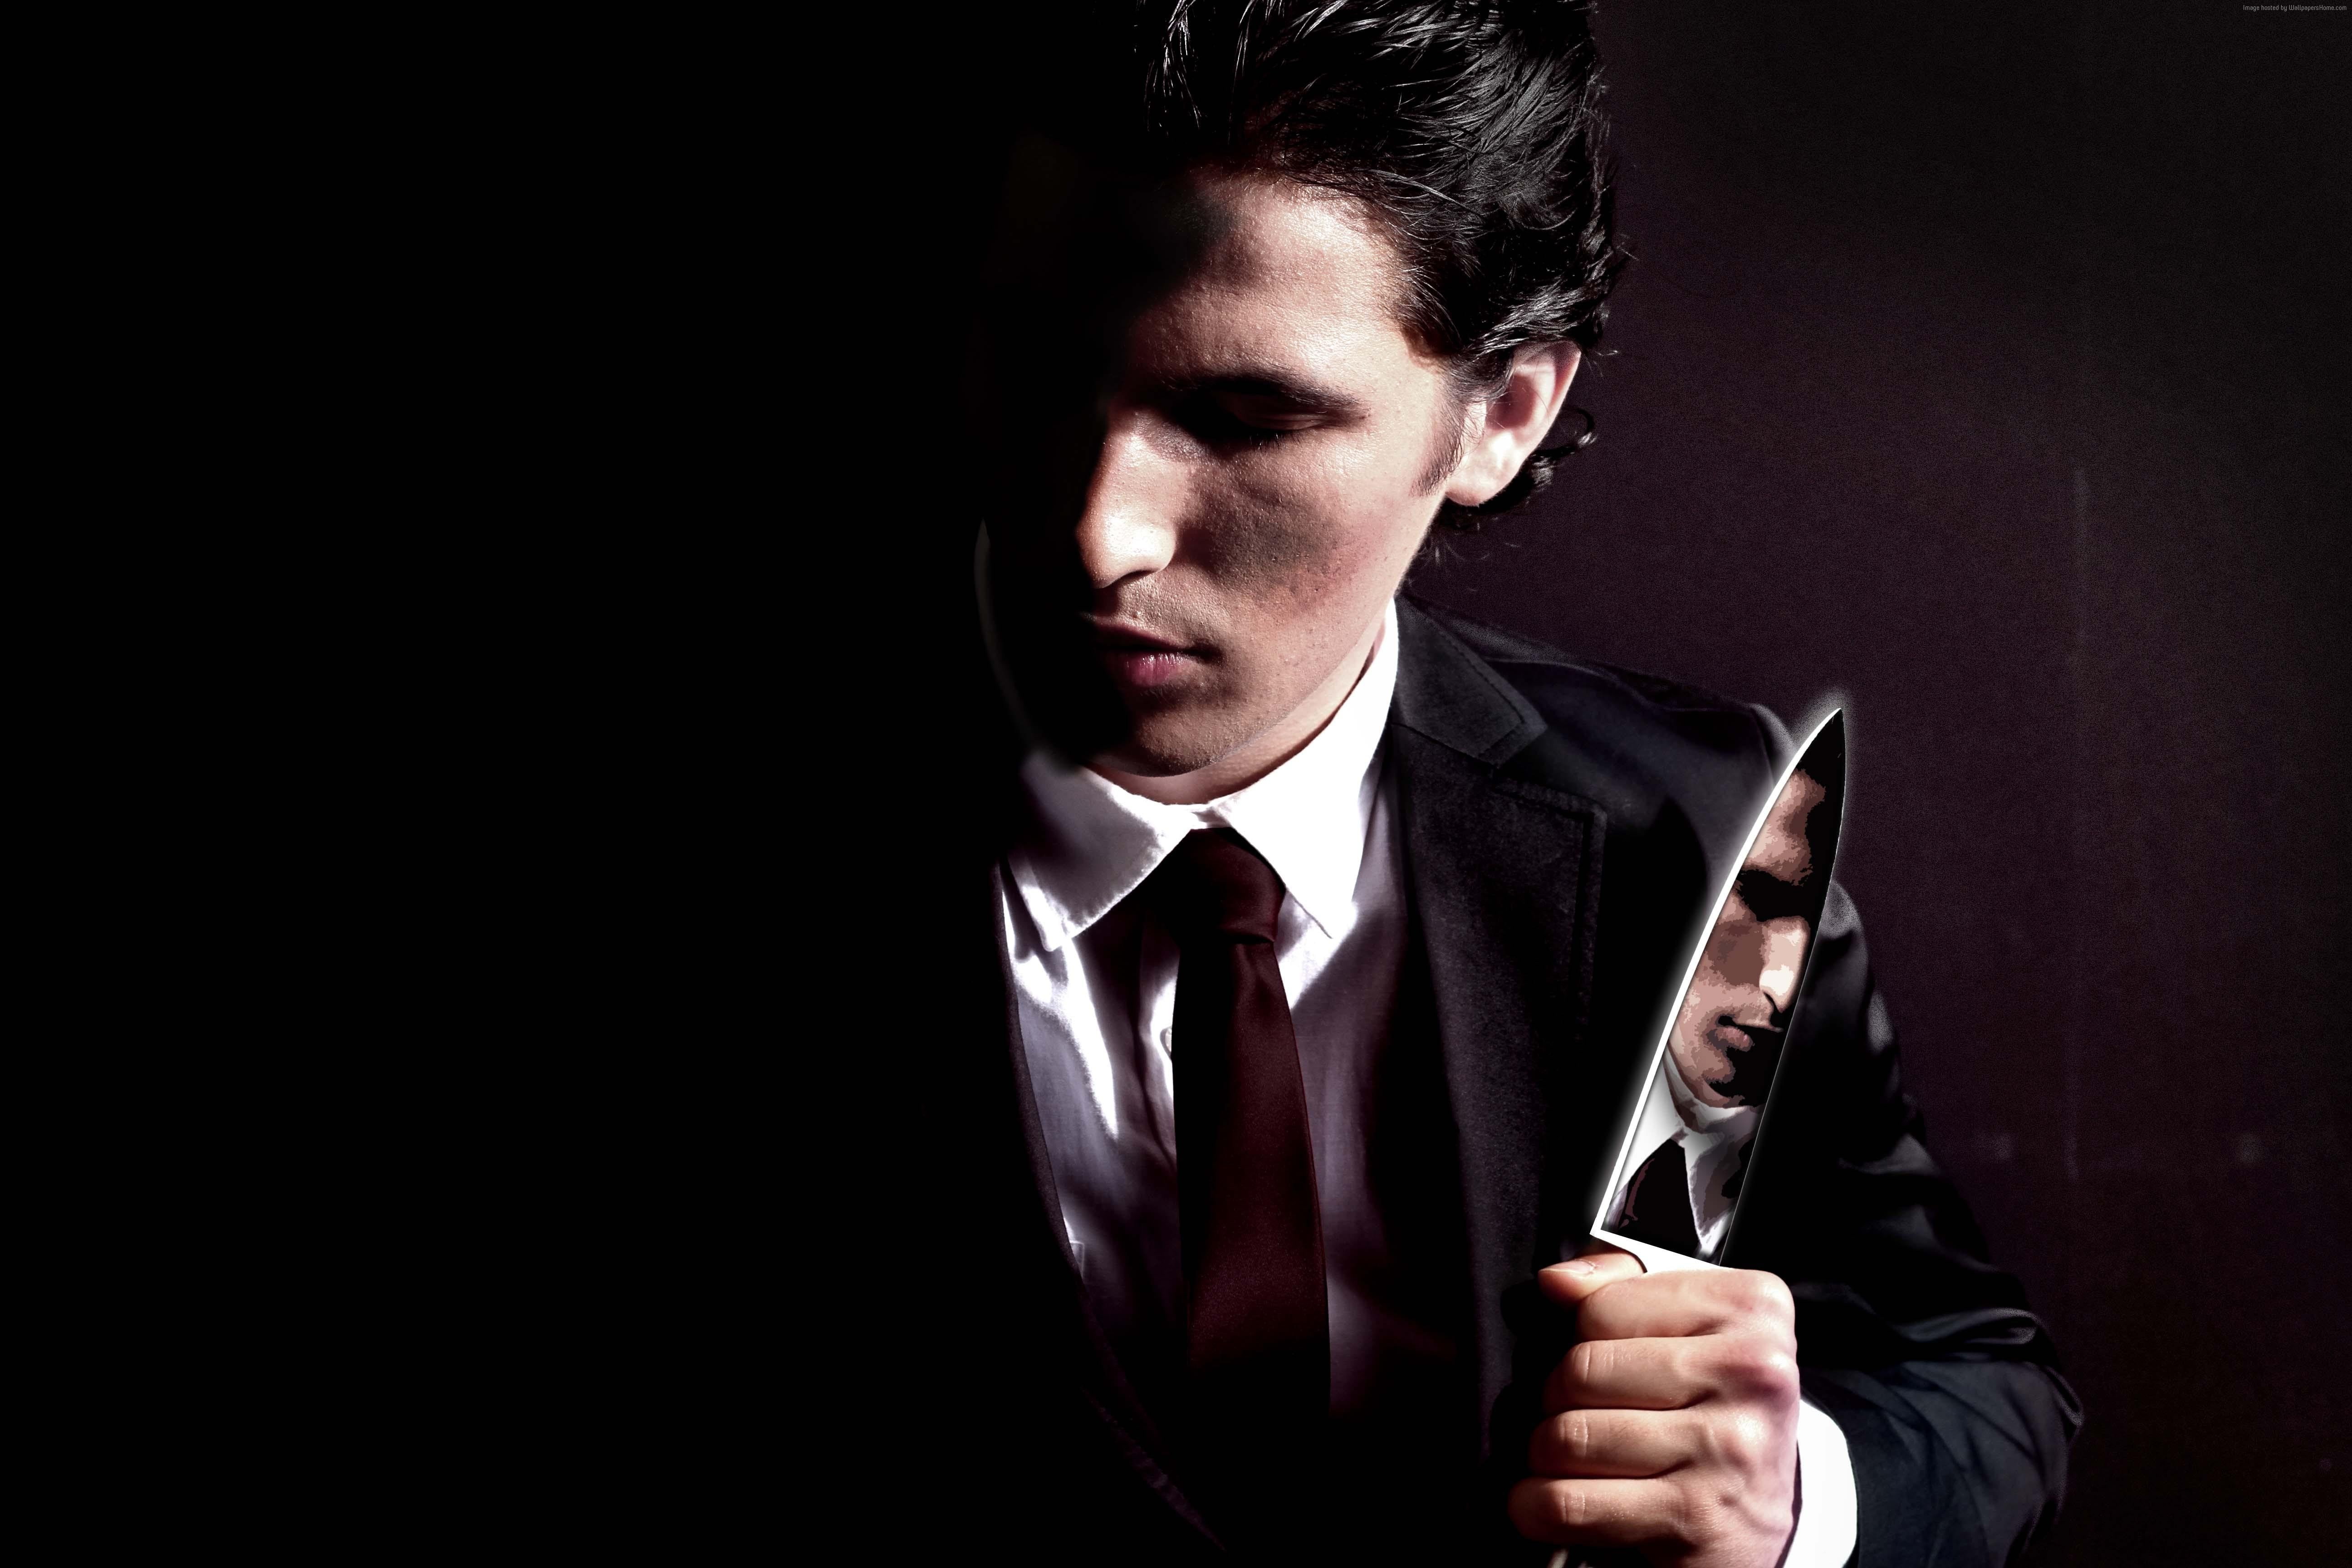 Christian Bale, American Psycho, actor, Most Popular Celebs